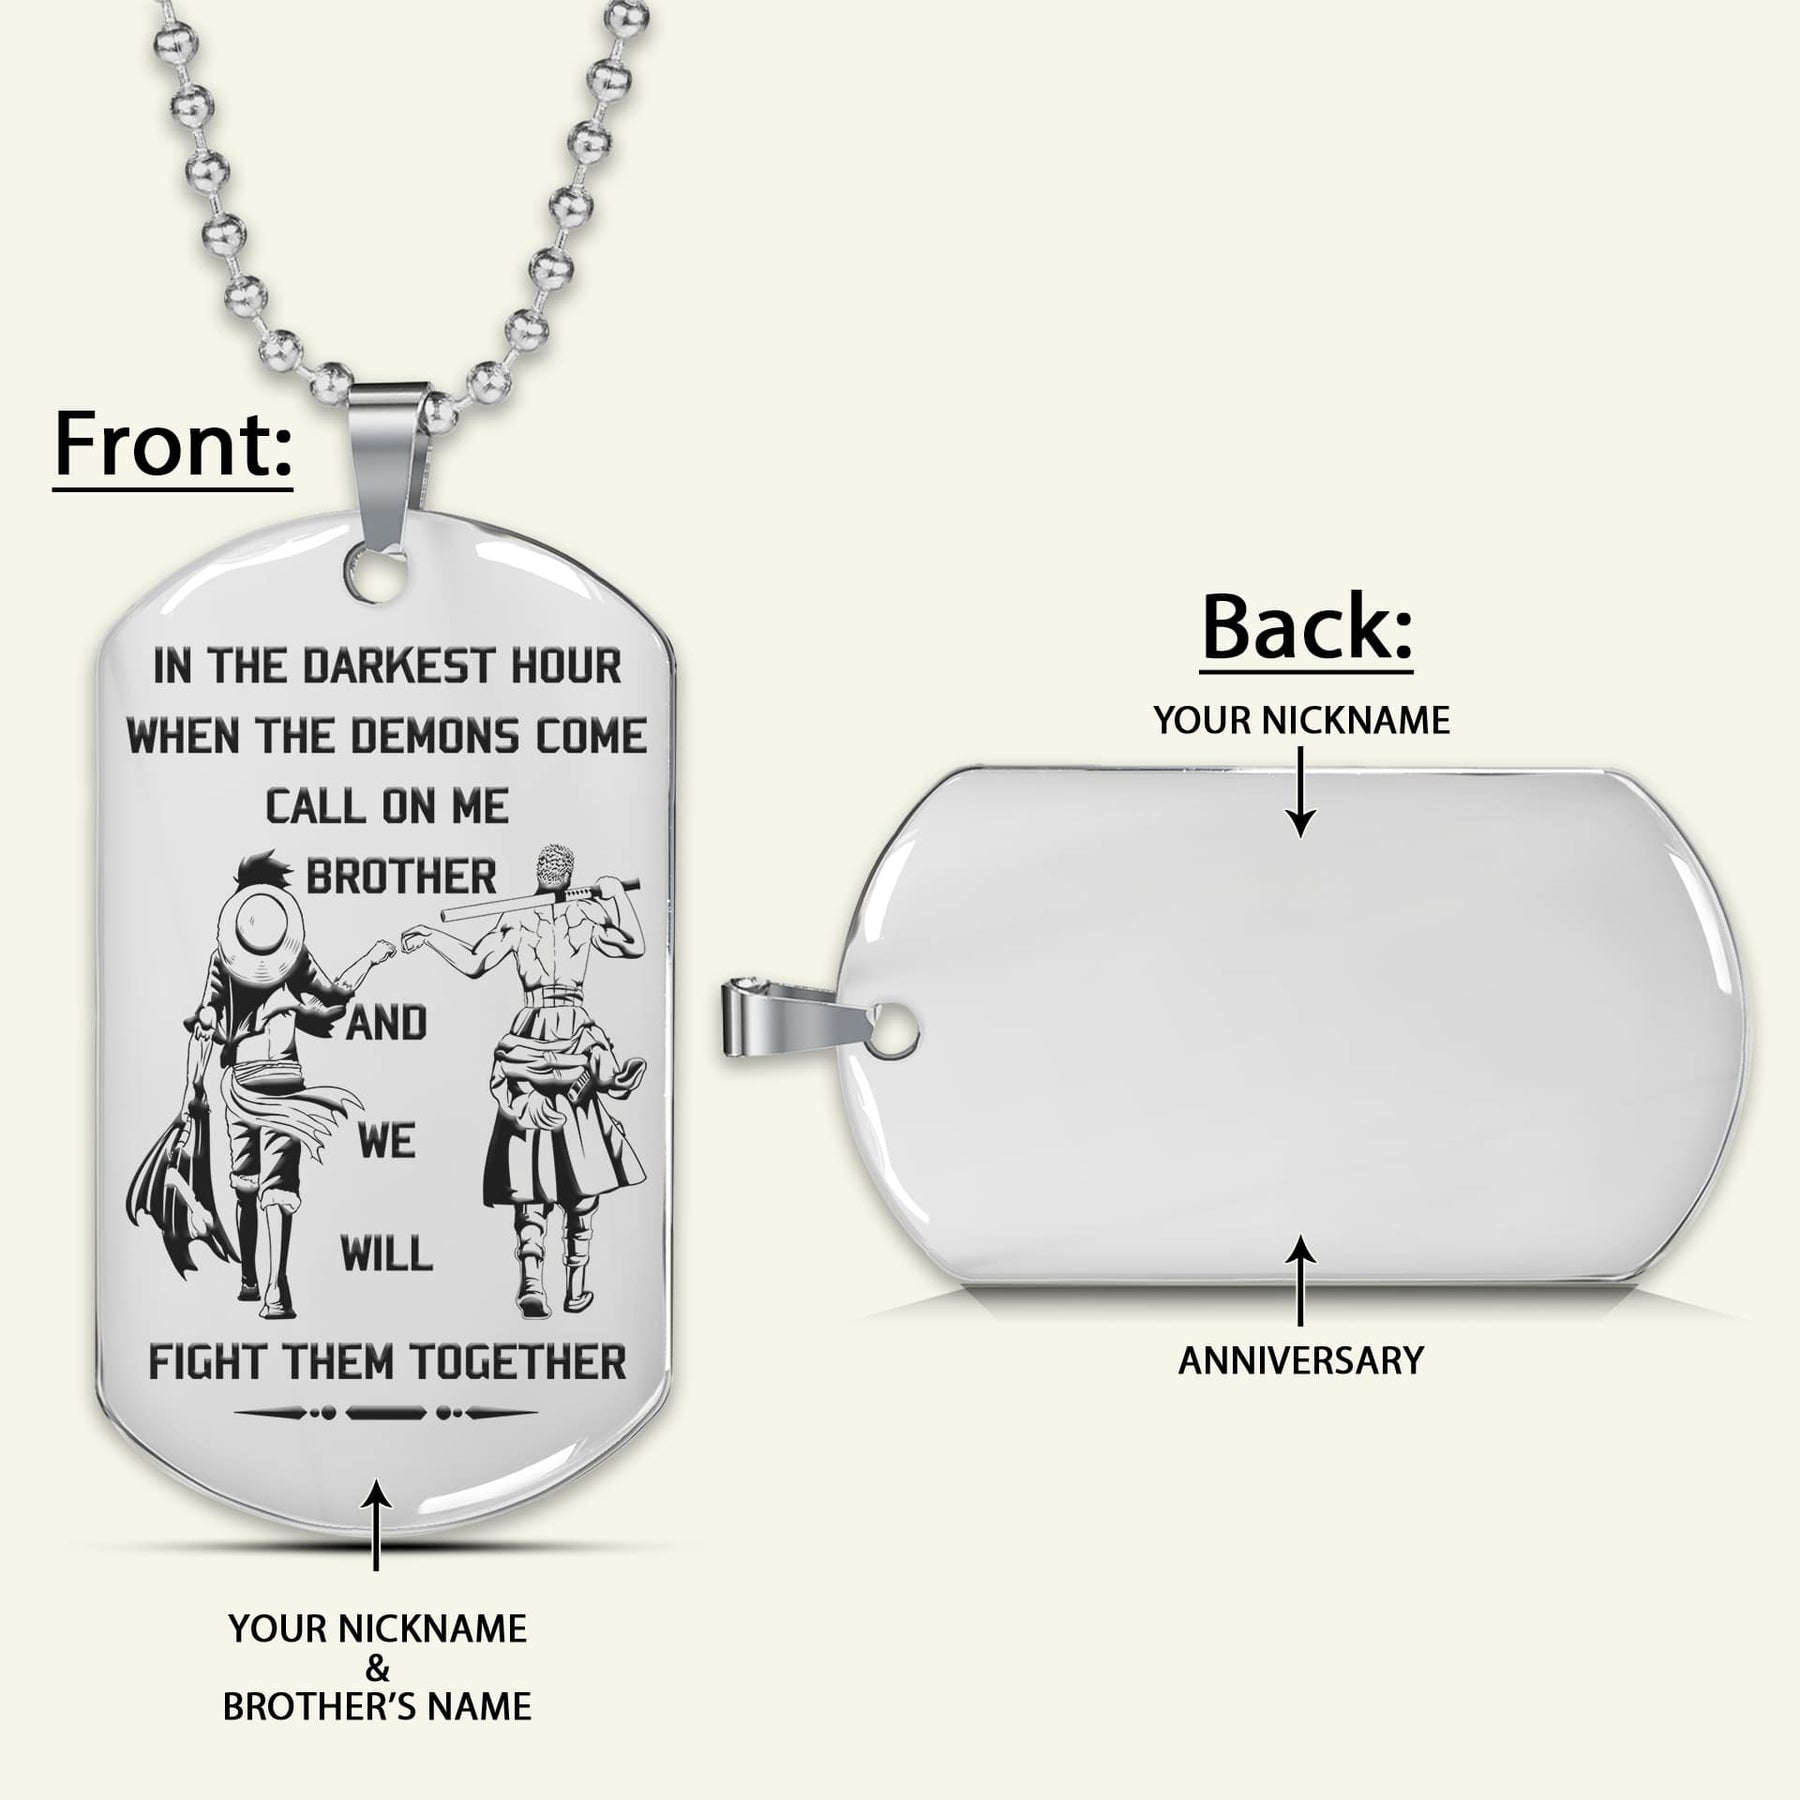 OPD013 - Call On me Brother - Monkey D. Luffy - Roronoa Zoro - One Piece Dog Tag - Engrave Silver Dog Tag